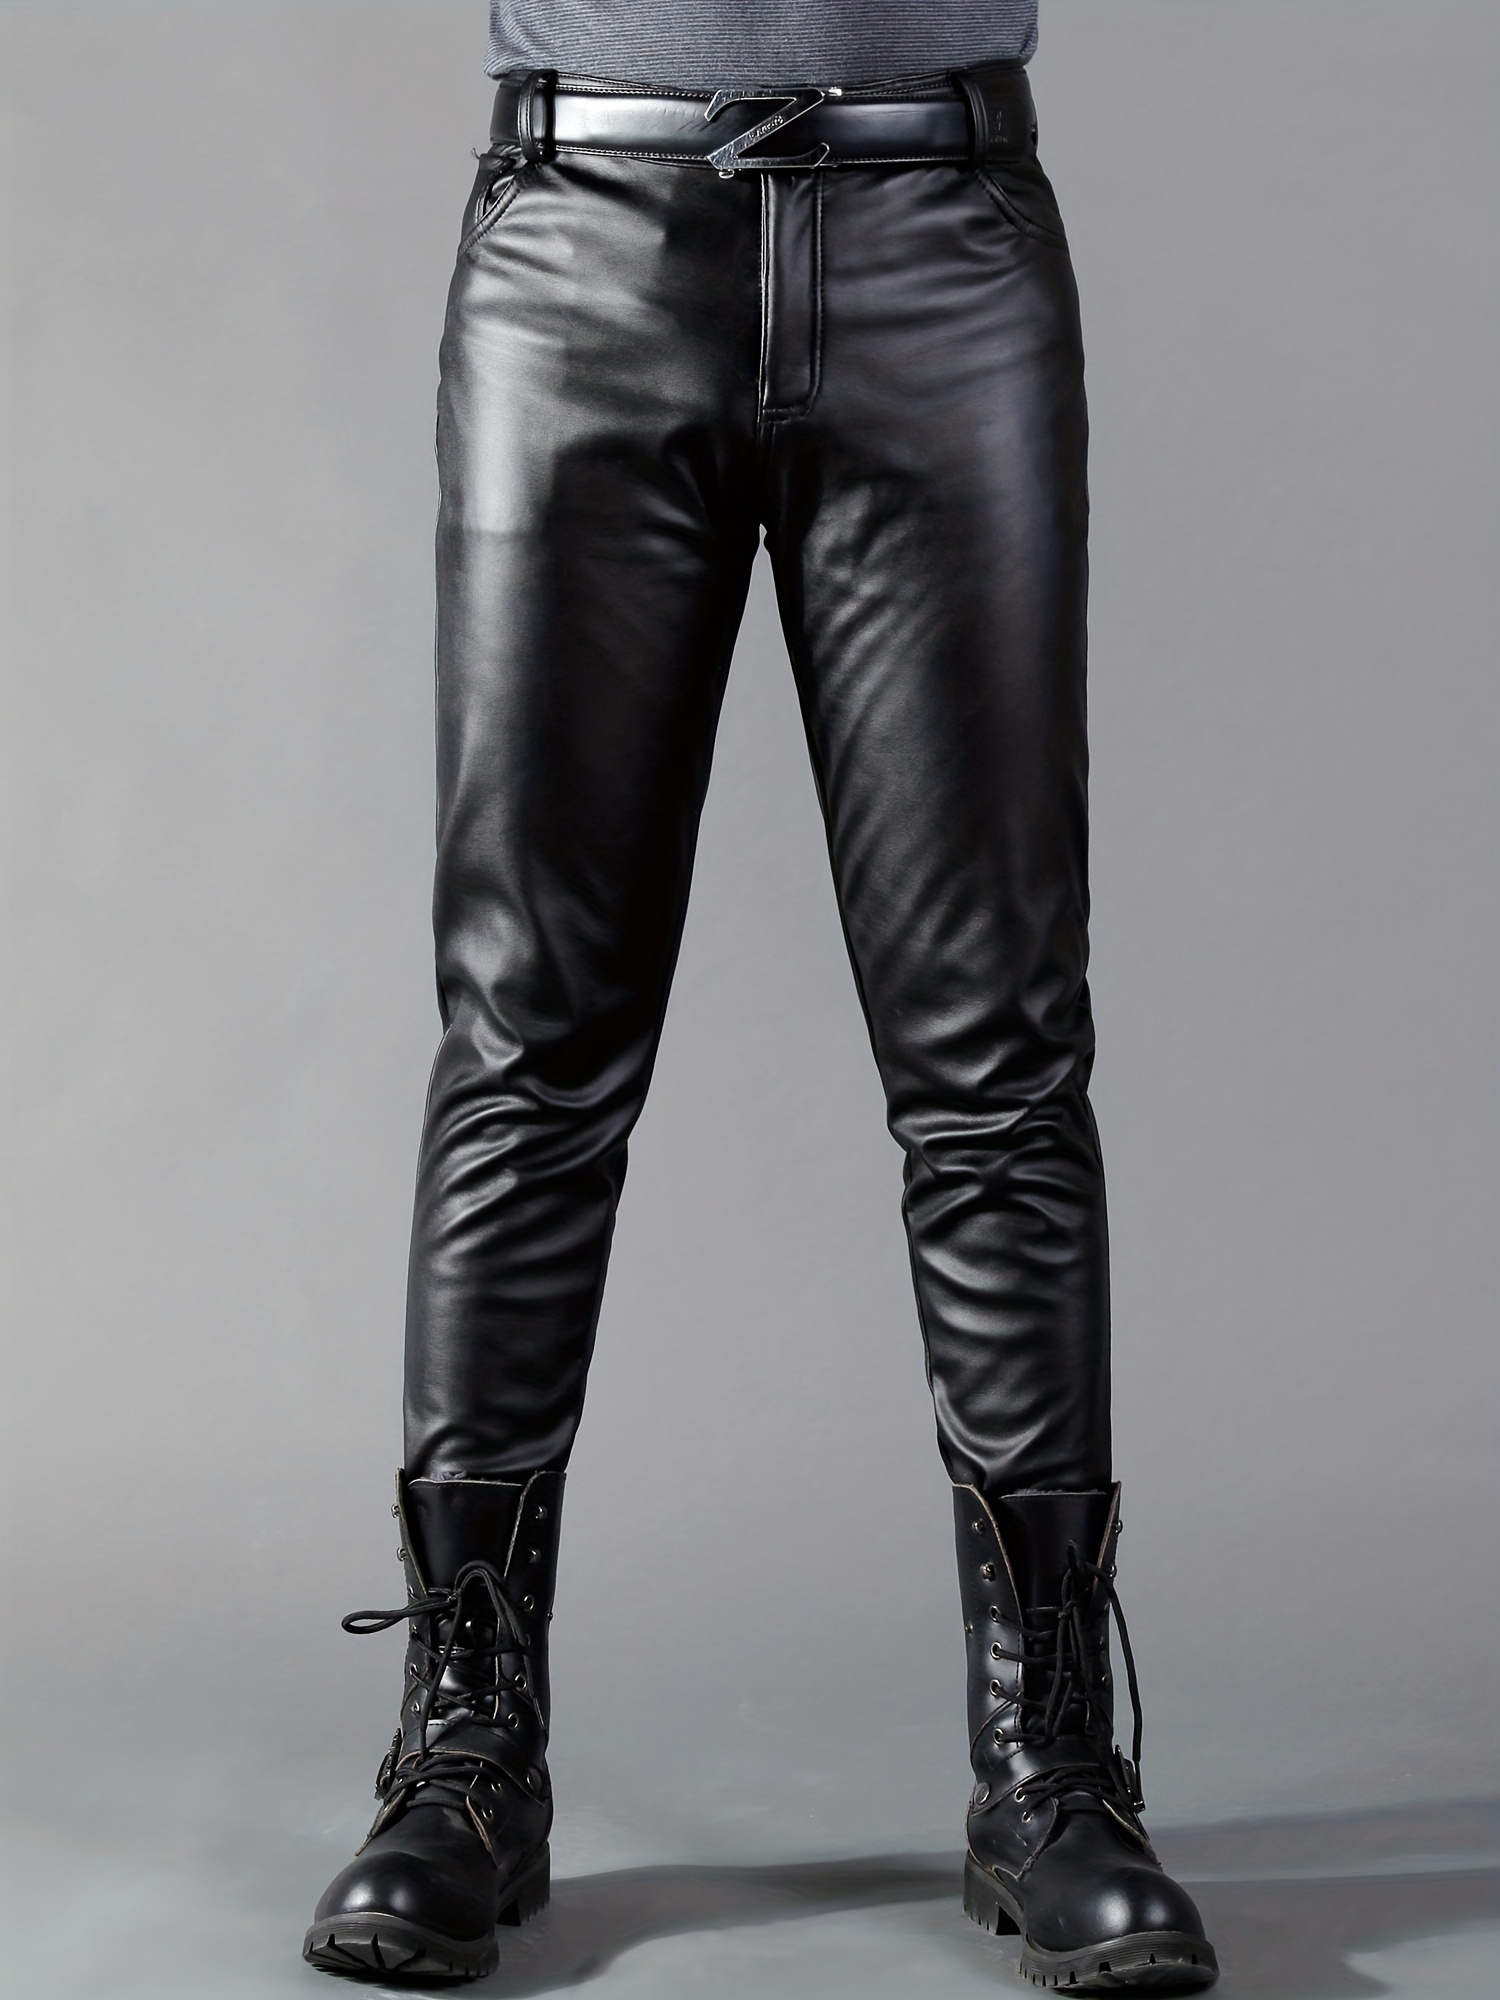 High Waist Stretch Black Leather Slim Fit Faux Leather Pants For